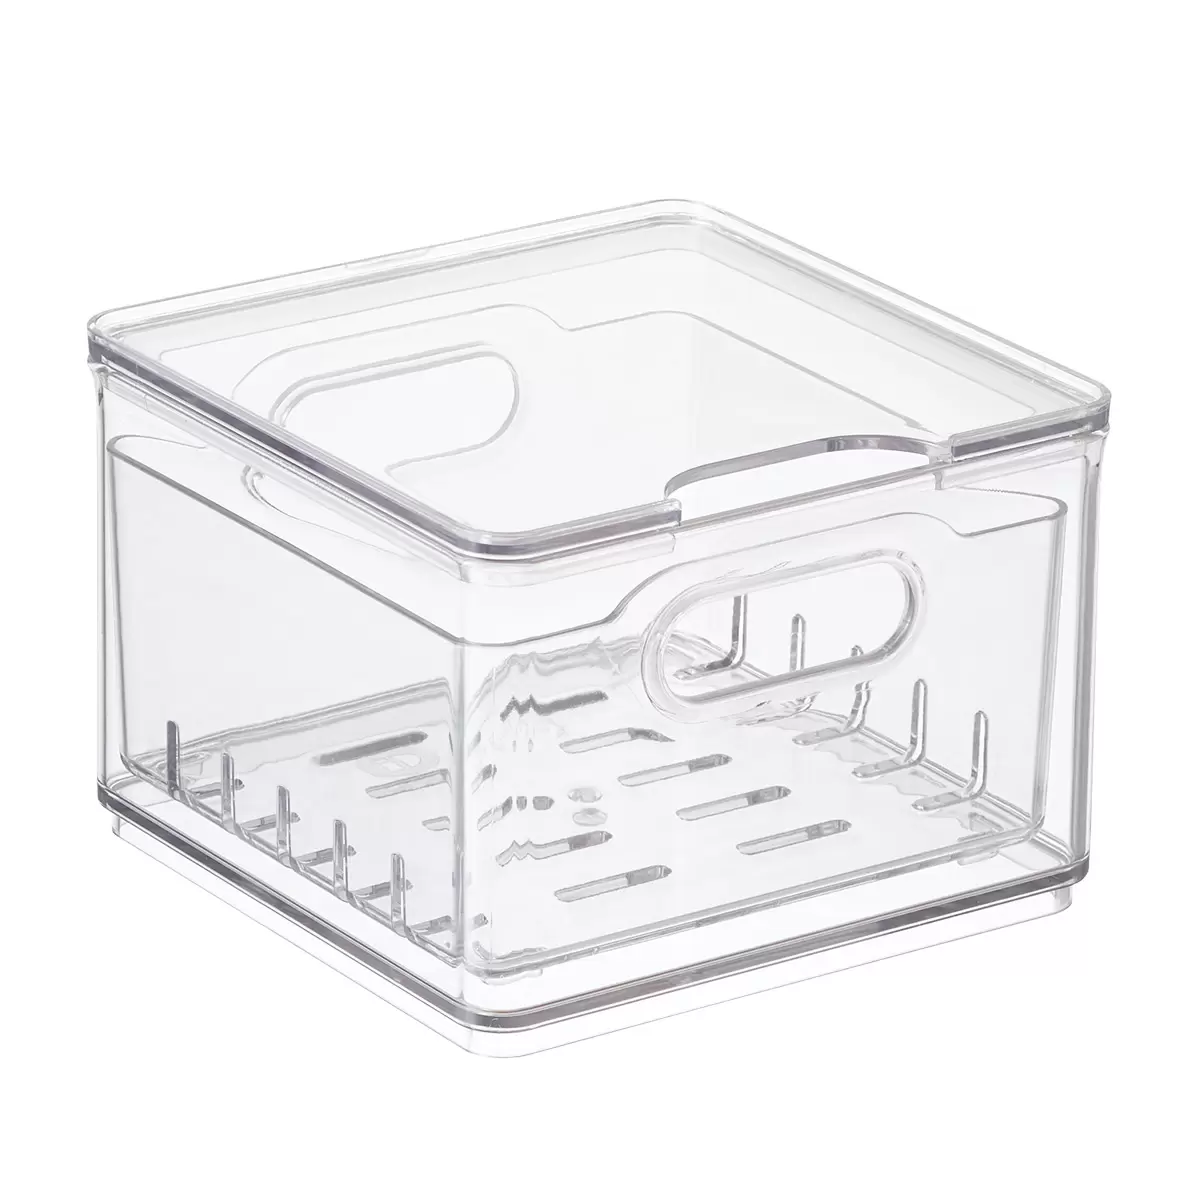 https://www.containerstore.com/catalogimages/387508/10080422-THE-small-berry-bin.jpg